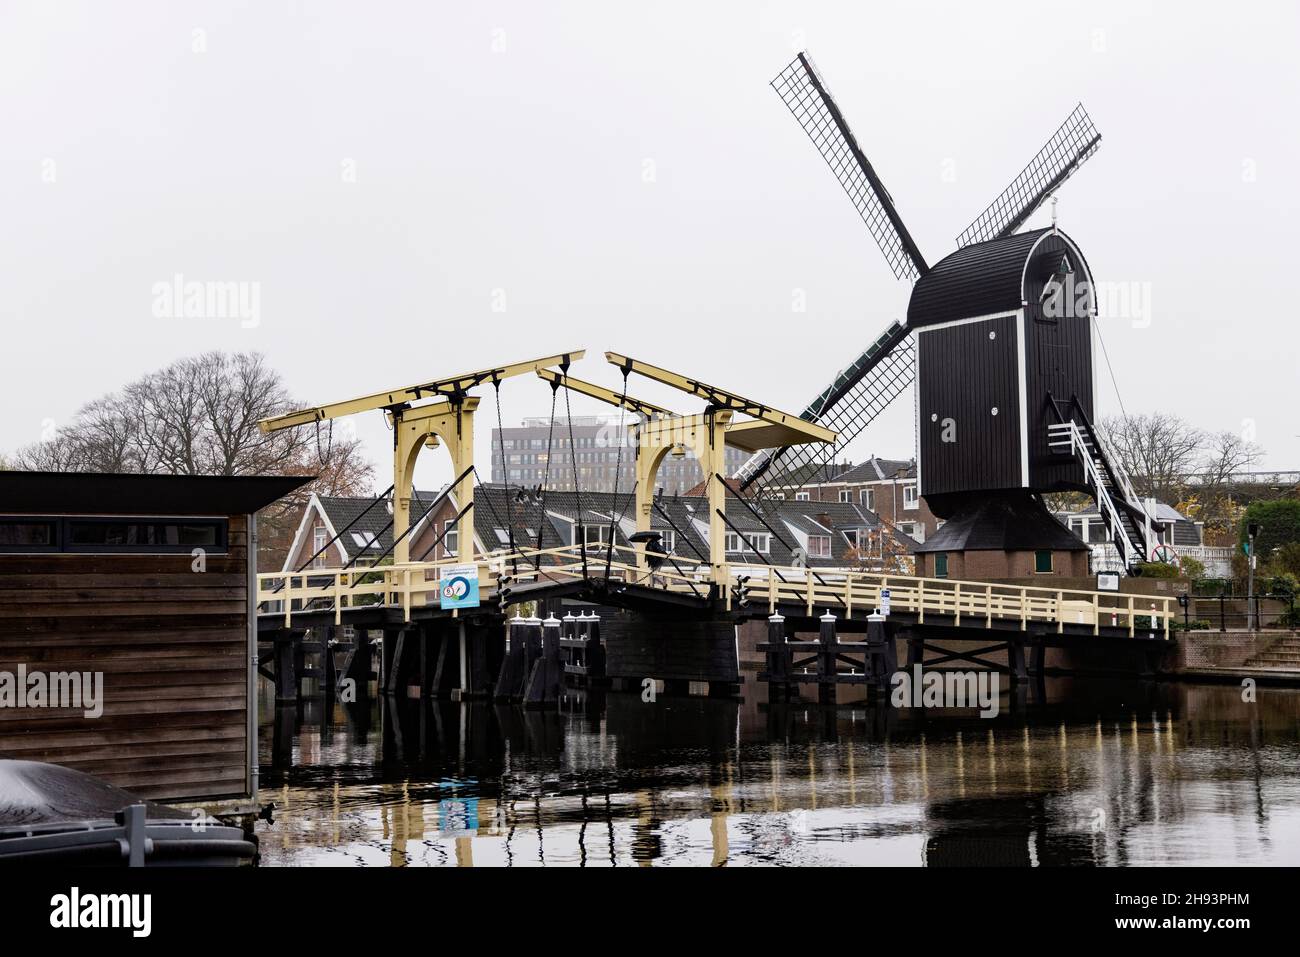 The Rembrandtbrug (Rembrandt Bridge) and Molen de Put windmill on the Galgewater of the Rhine River in Leiden, Netherlands. Stock Photo